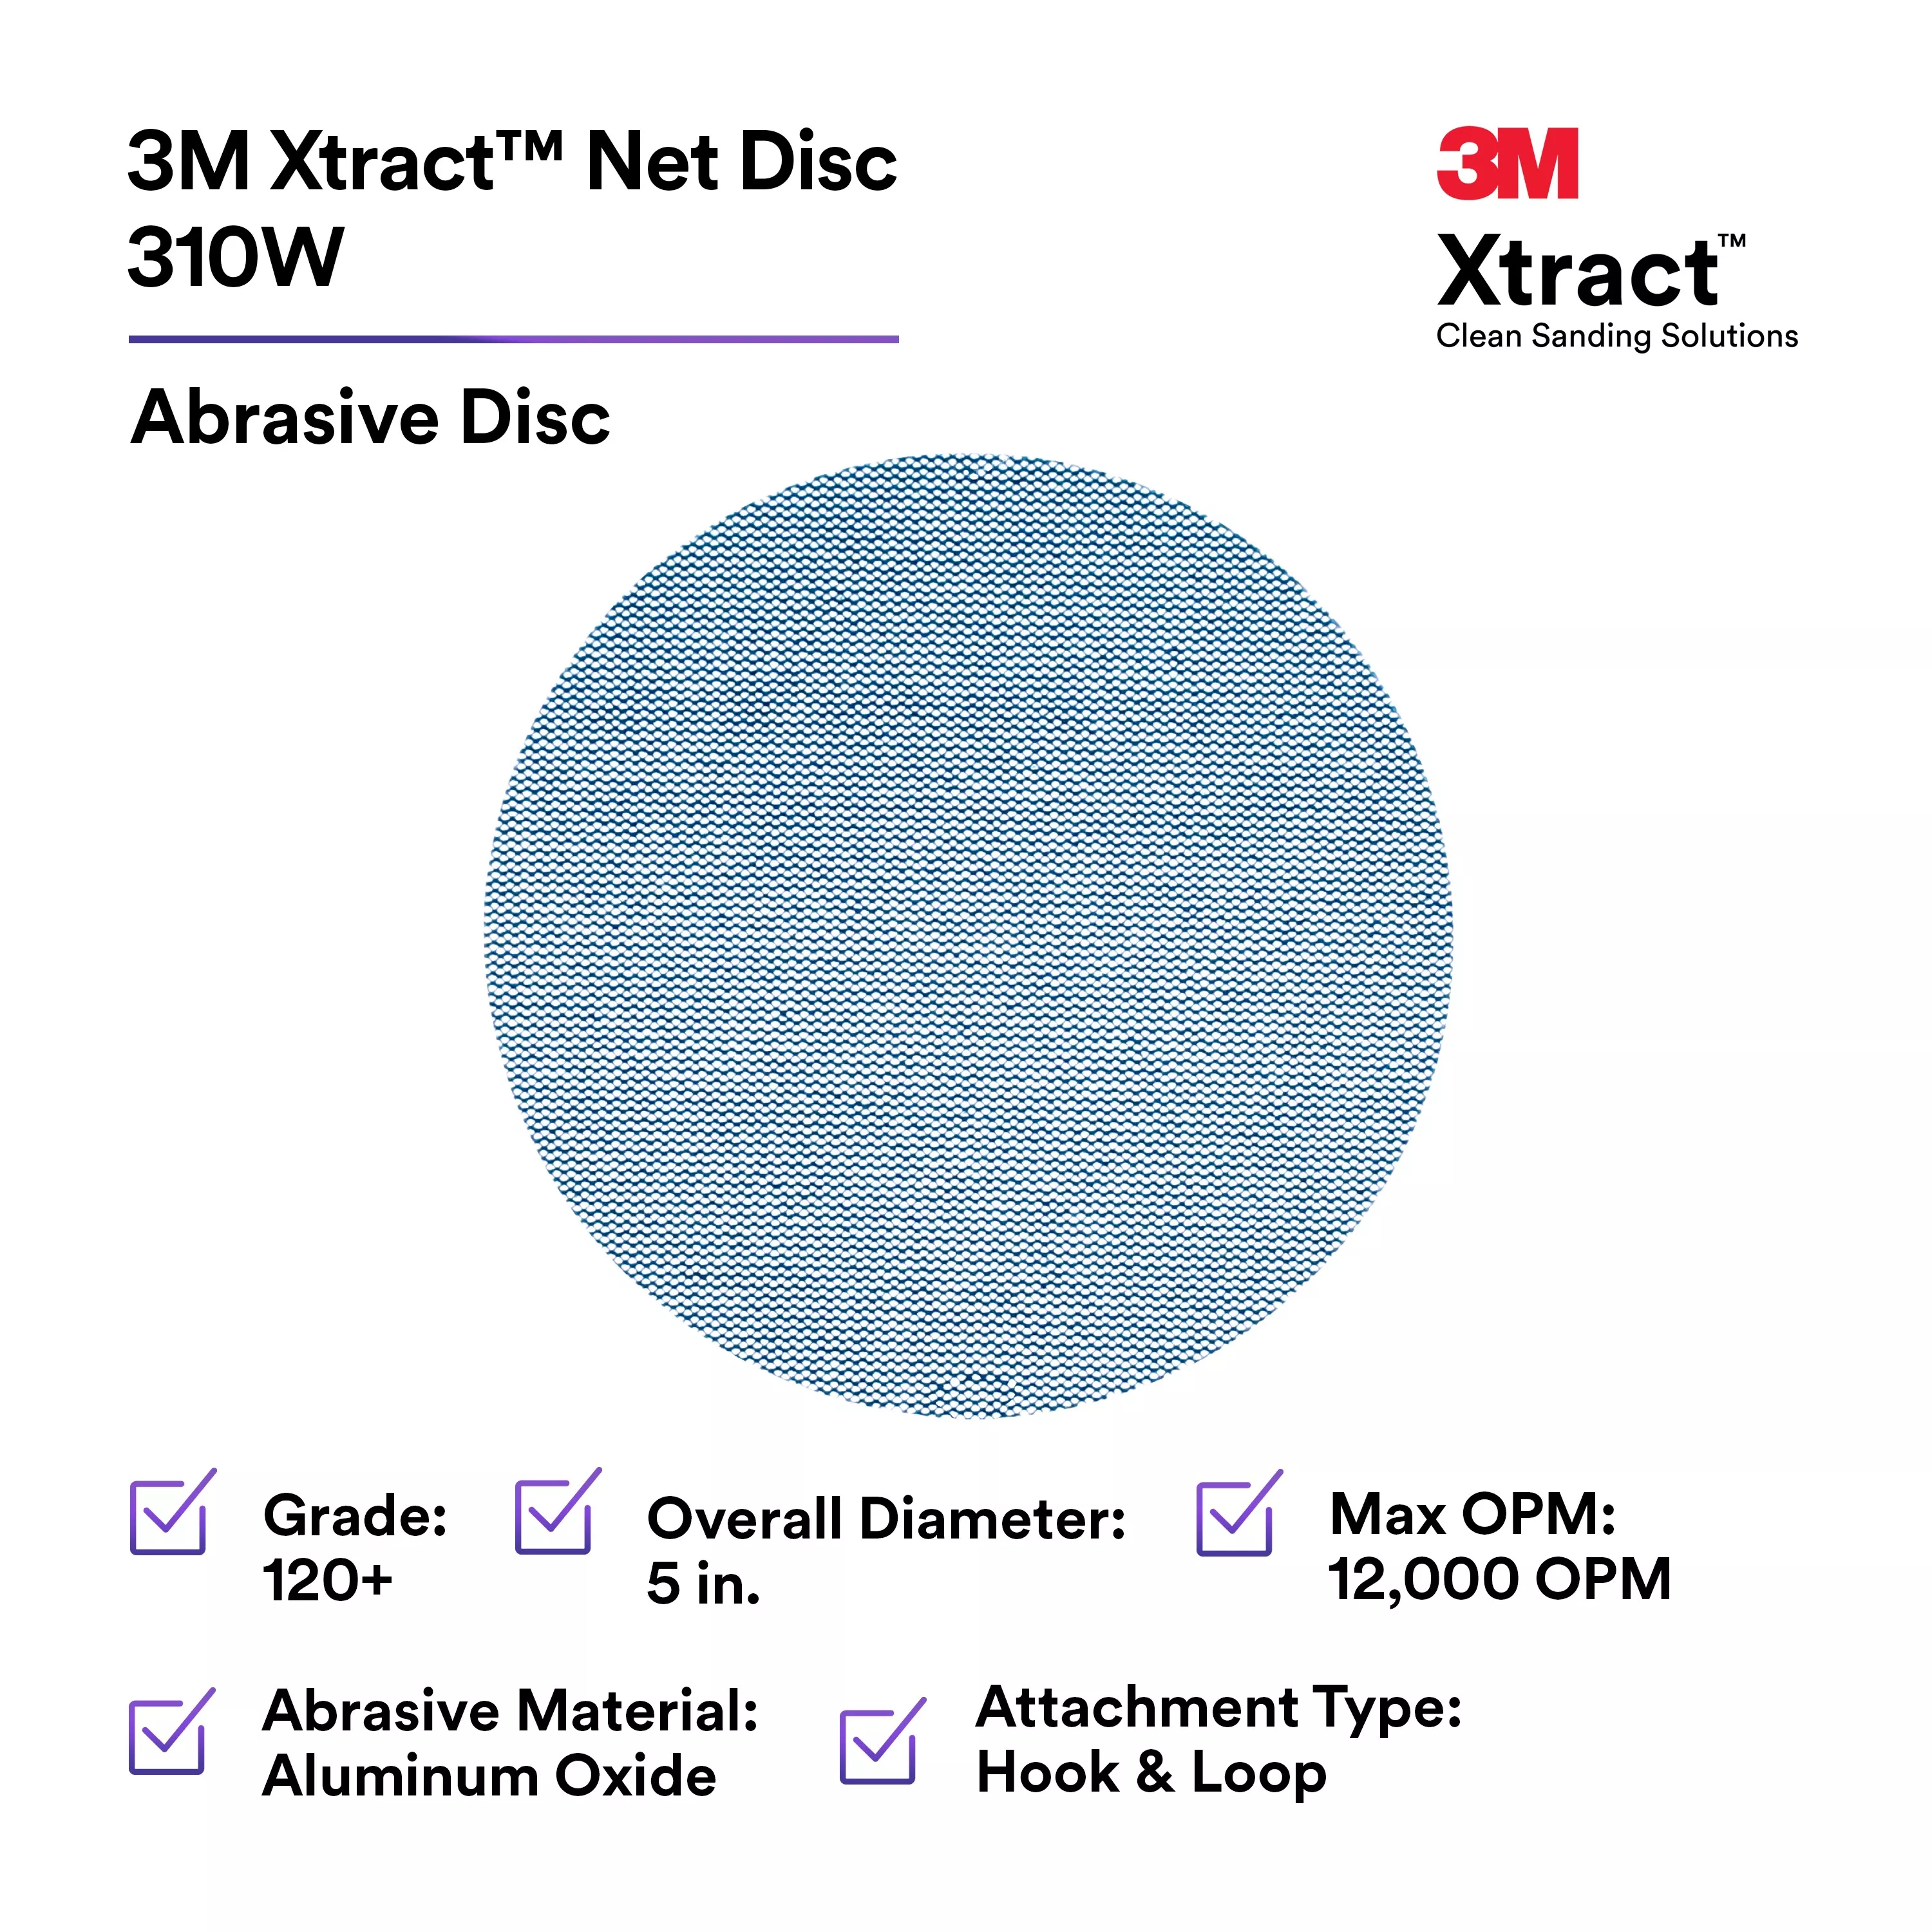 Product Number 310W | 3M Xtract™ Net Disc 310W